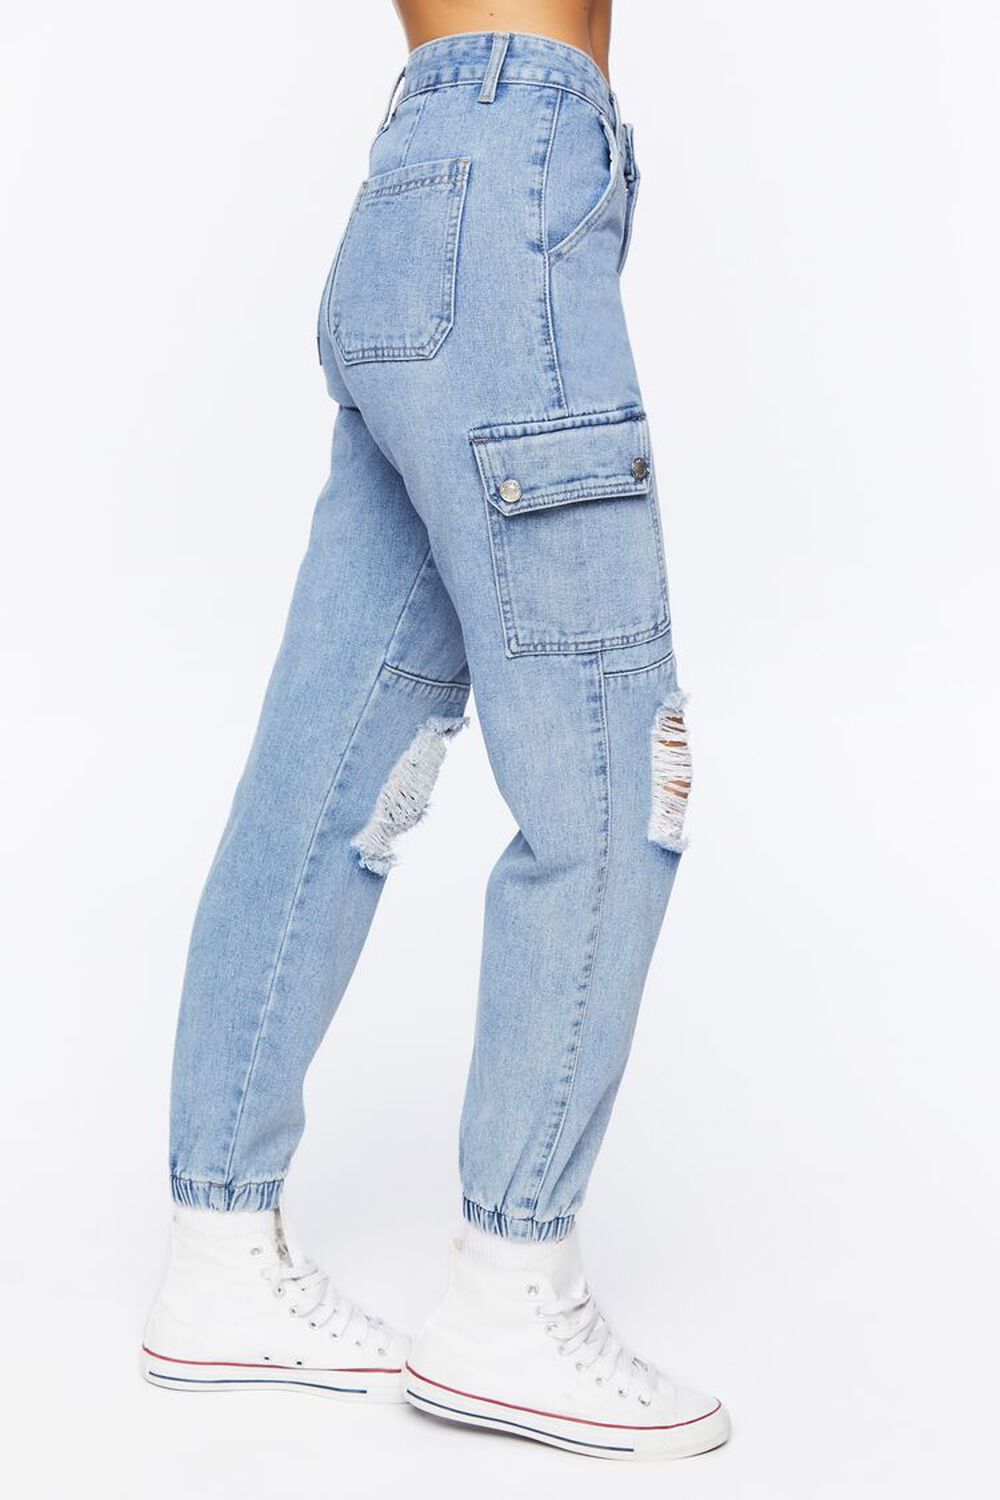 ⚠️ Cargo Jean are Running Low. Get it before its Gone 👖 Indigo